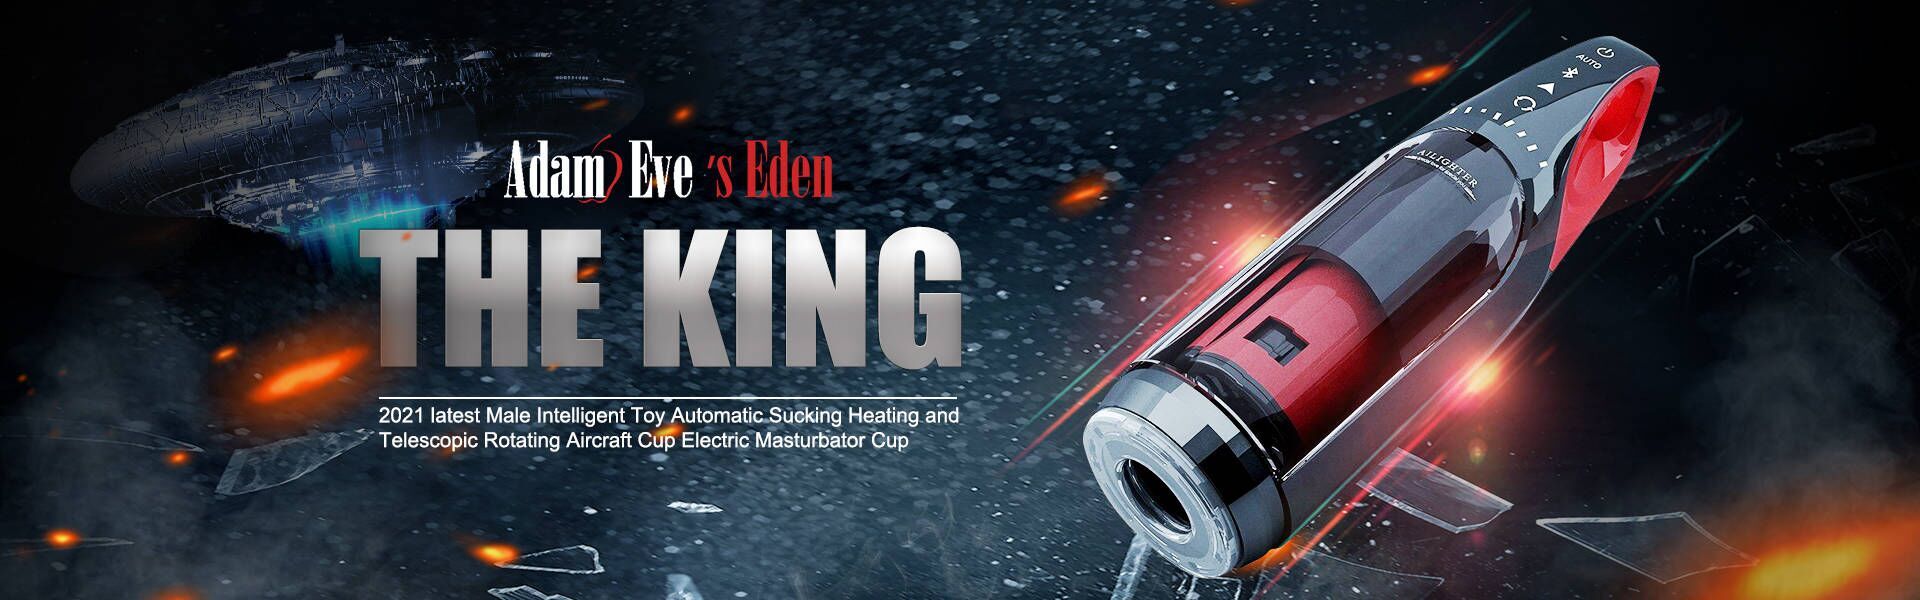 Automatic Sucking Heating and Telescopic Rotating Aircraft Cup